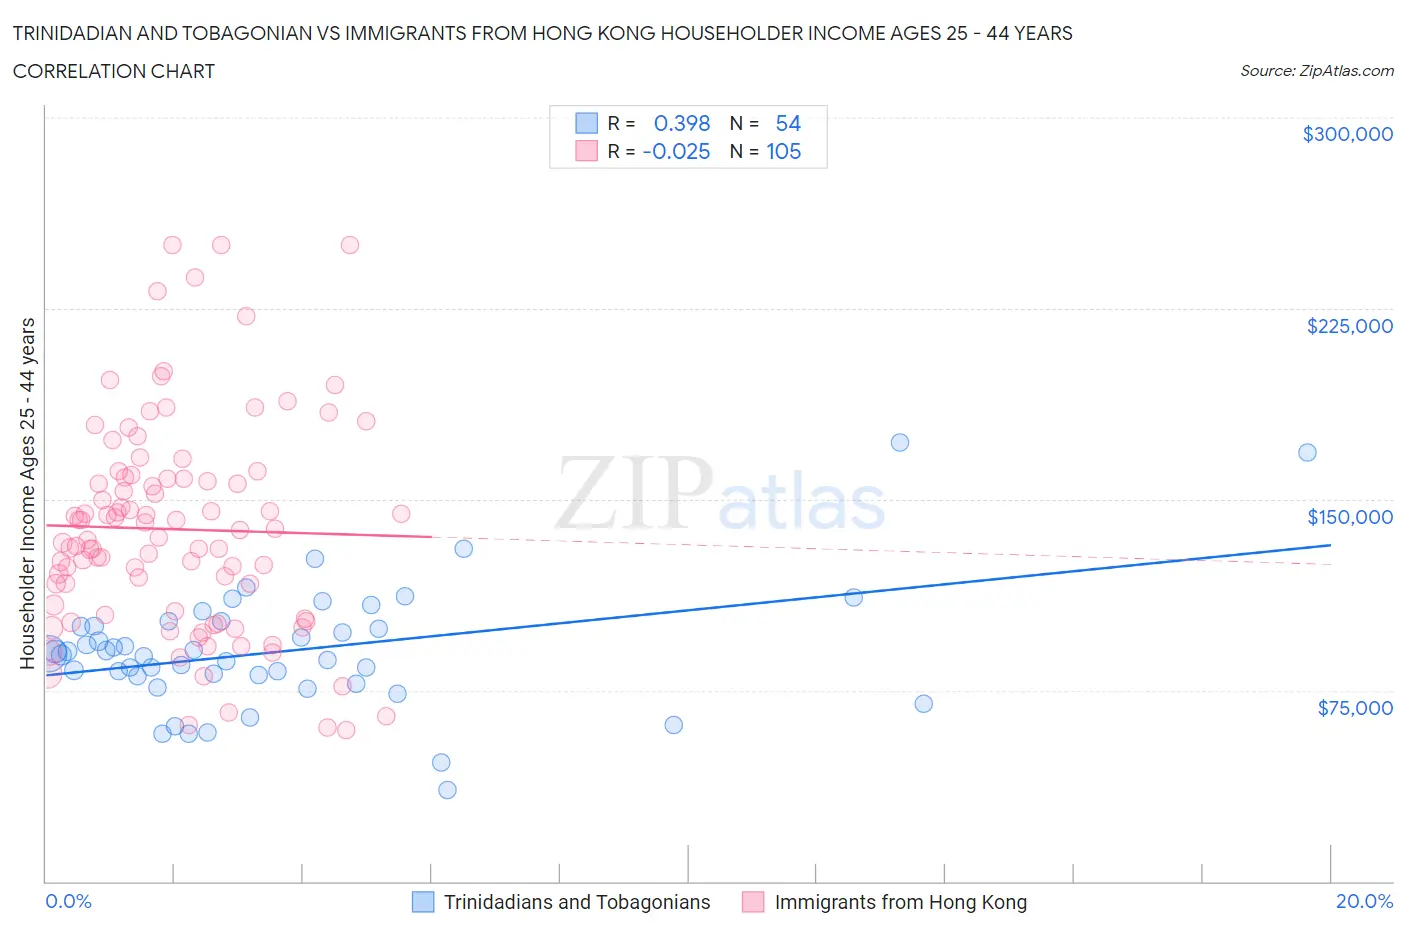 Trinidadian and Tobagonian vs Immigrants from Hong Kong Householder Income Ages 25 - 44 years